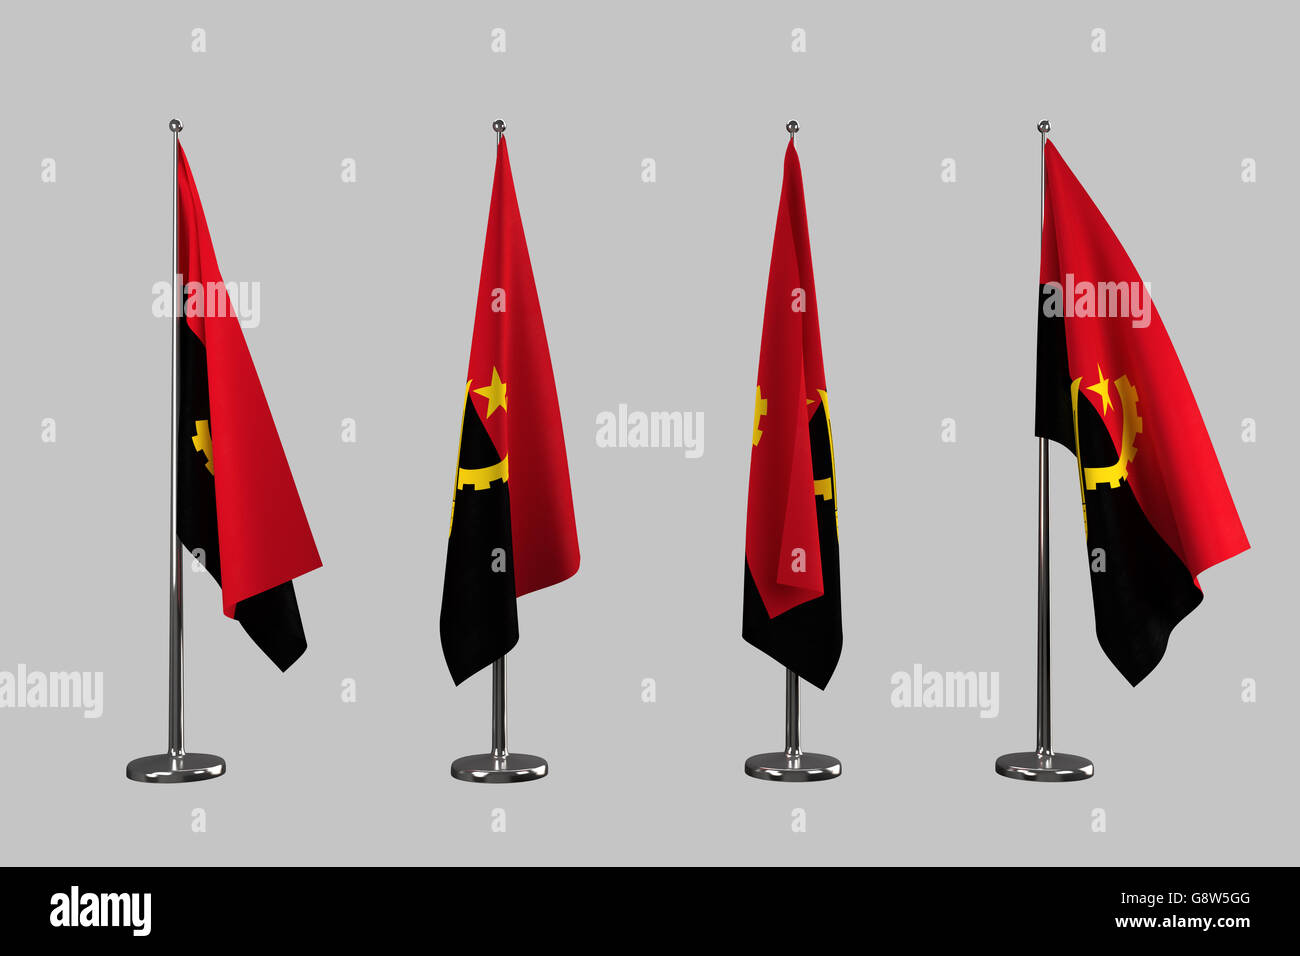 Angola indoor flags isolate on white background Stock Photo